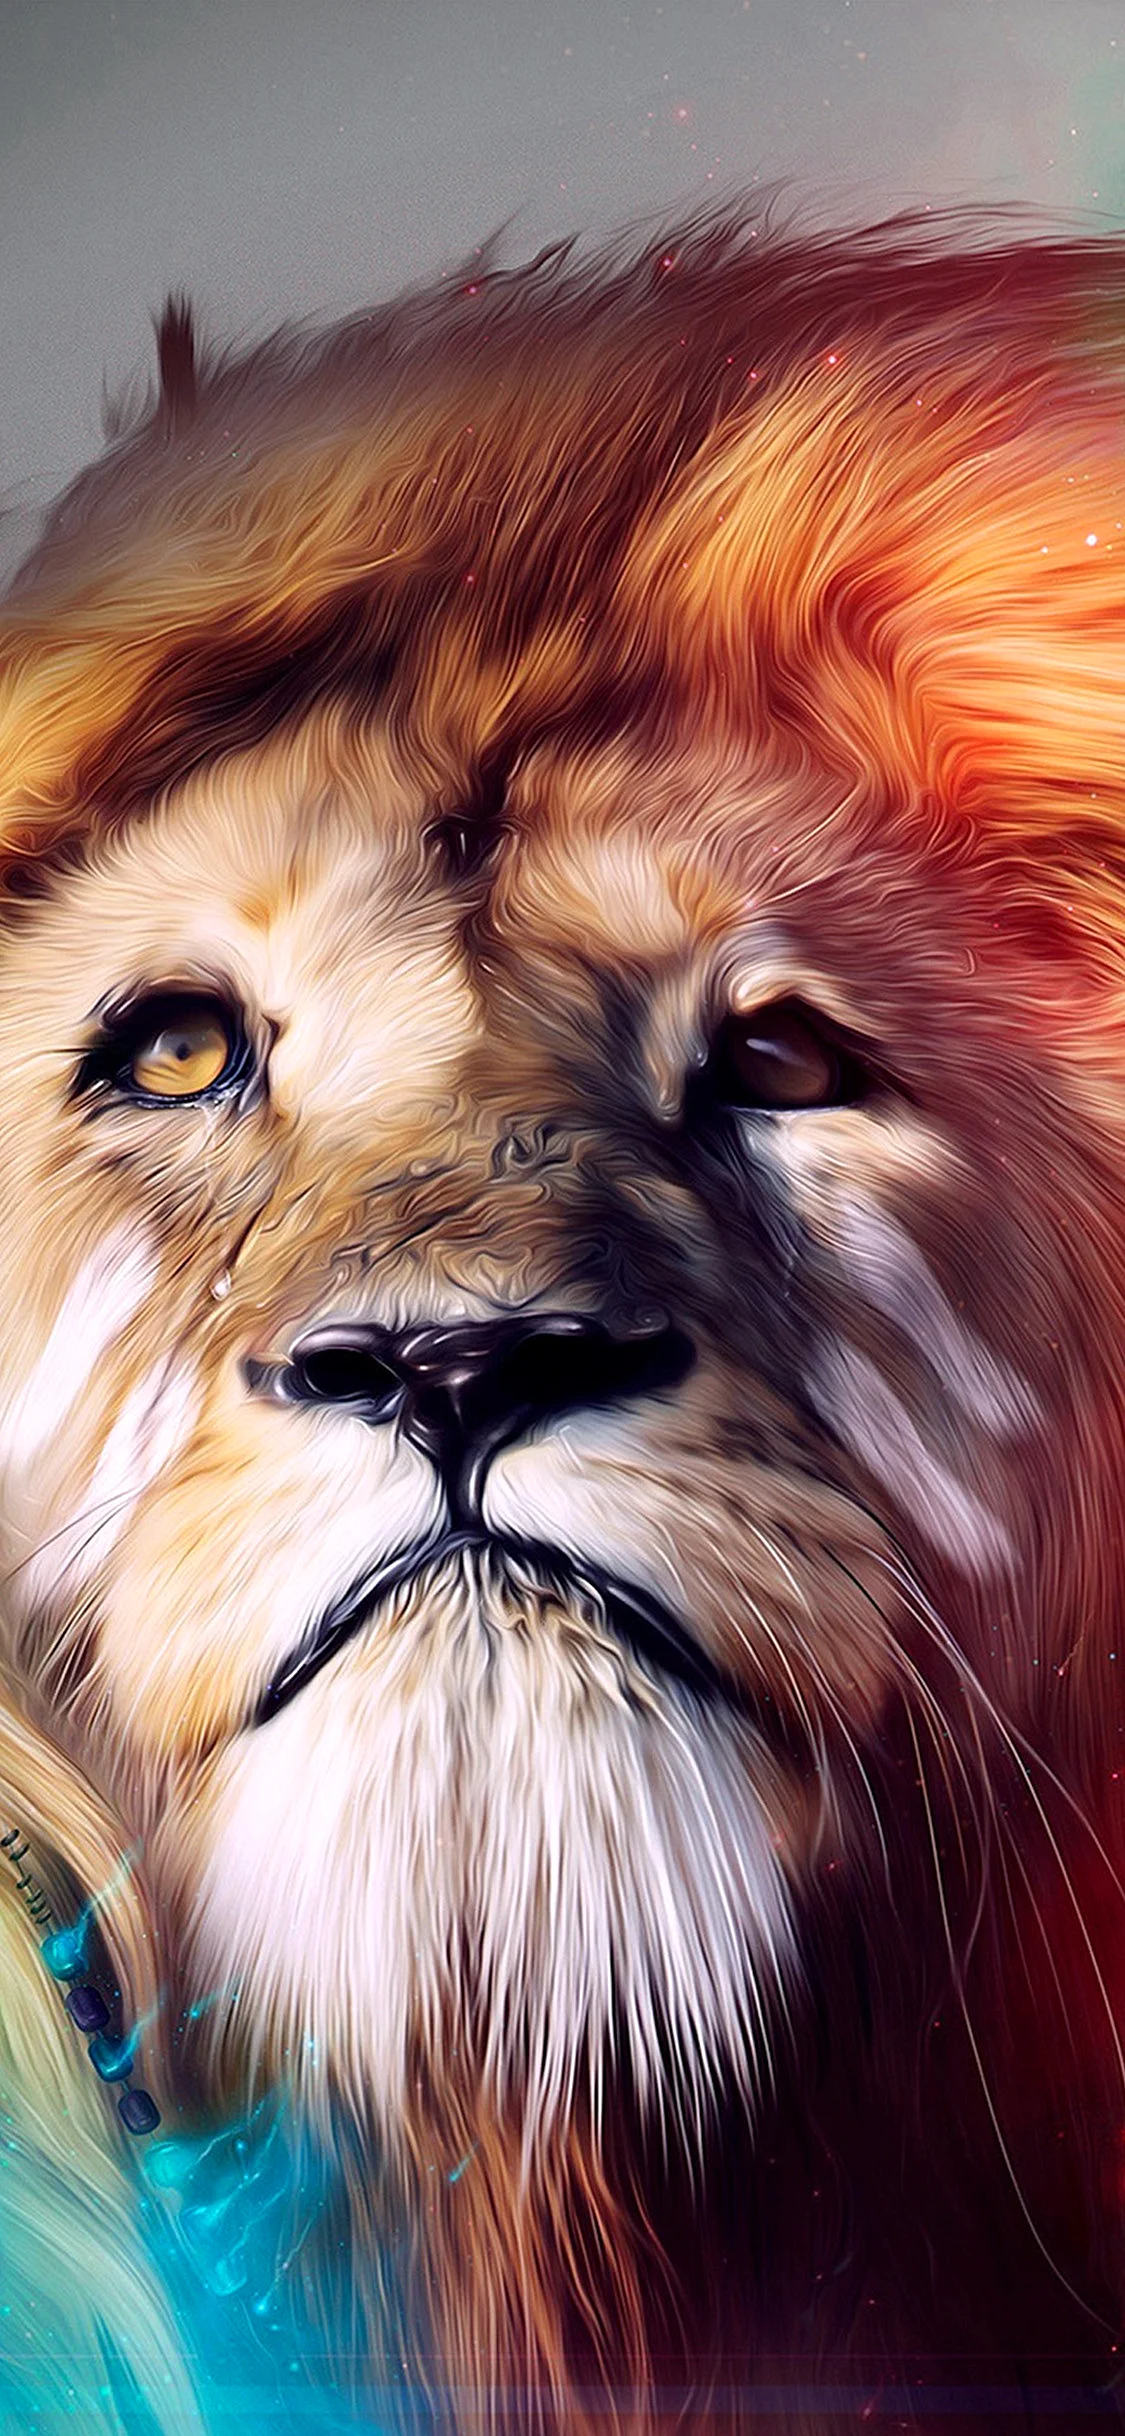 Rainbow Lion Wallpaper for iPhone 11 Pro